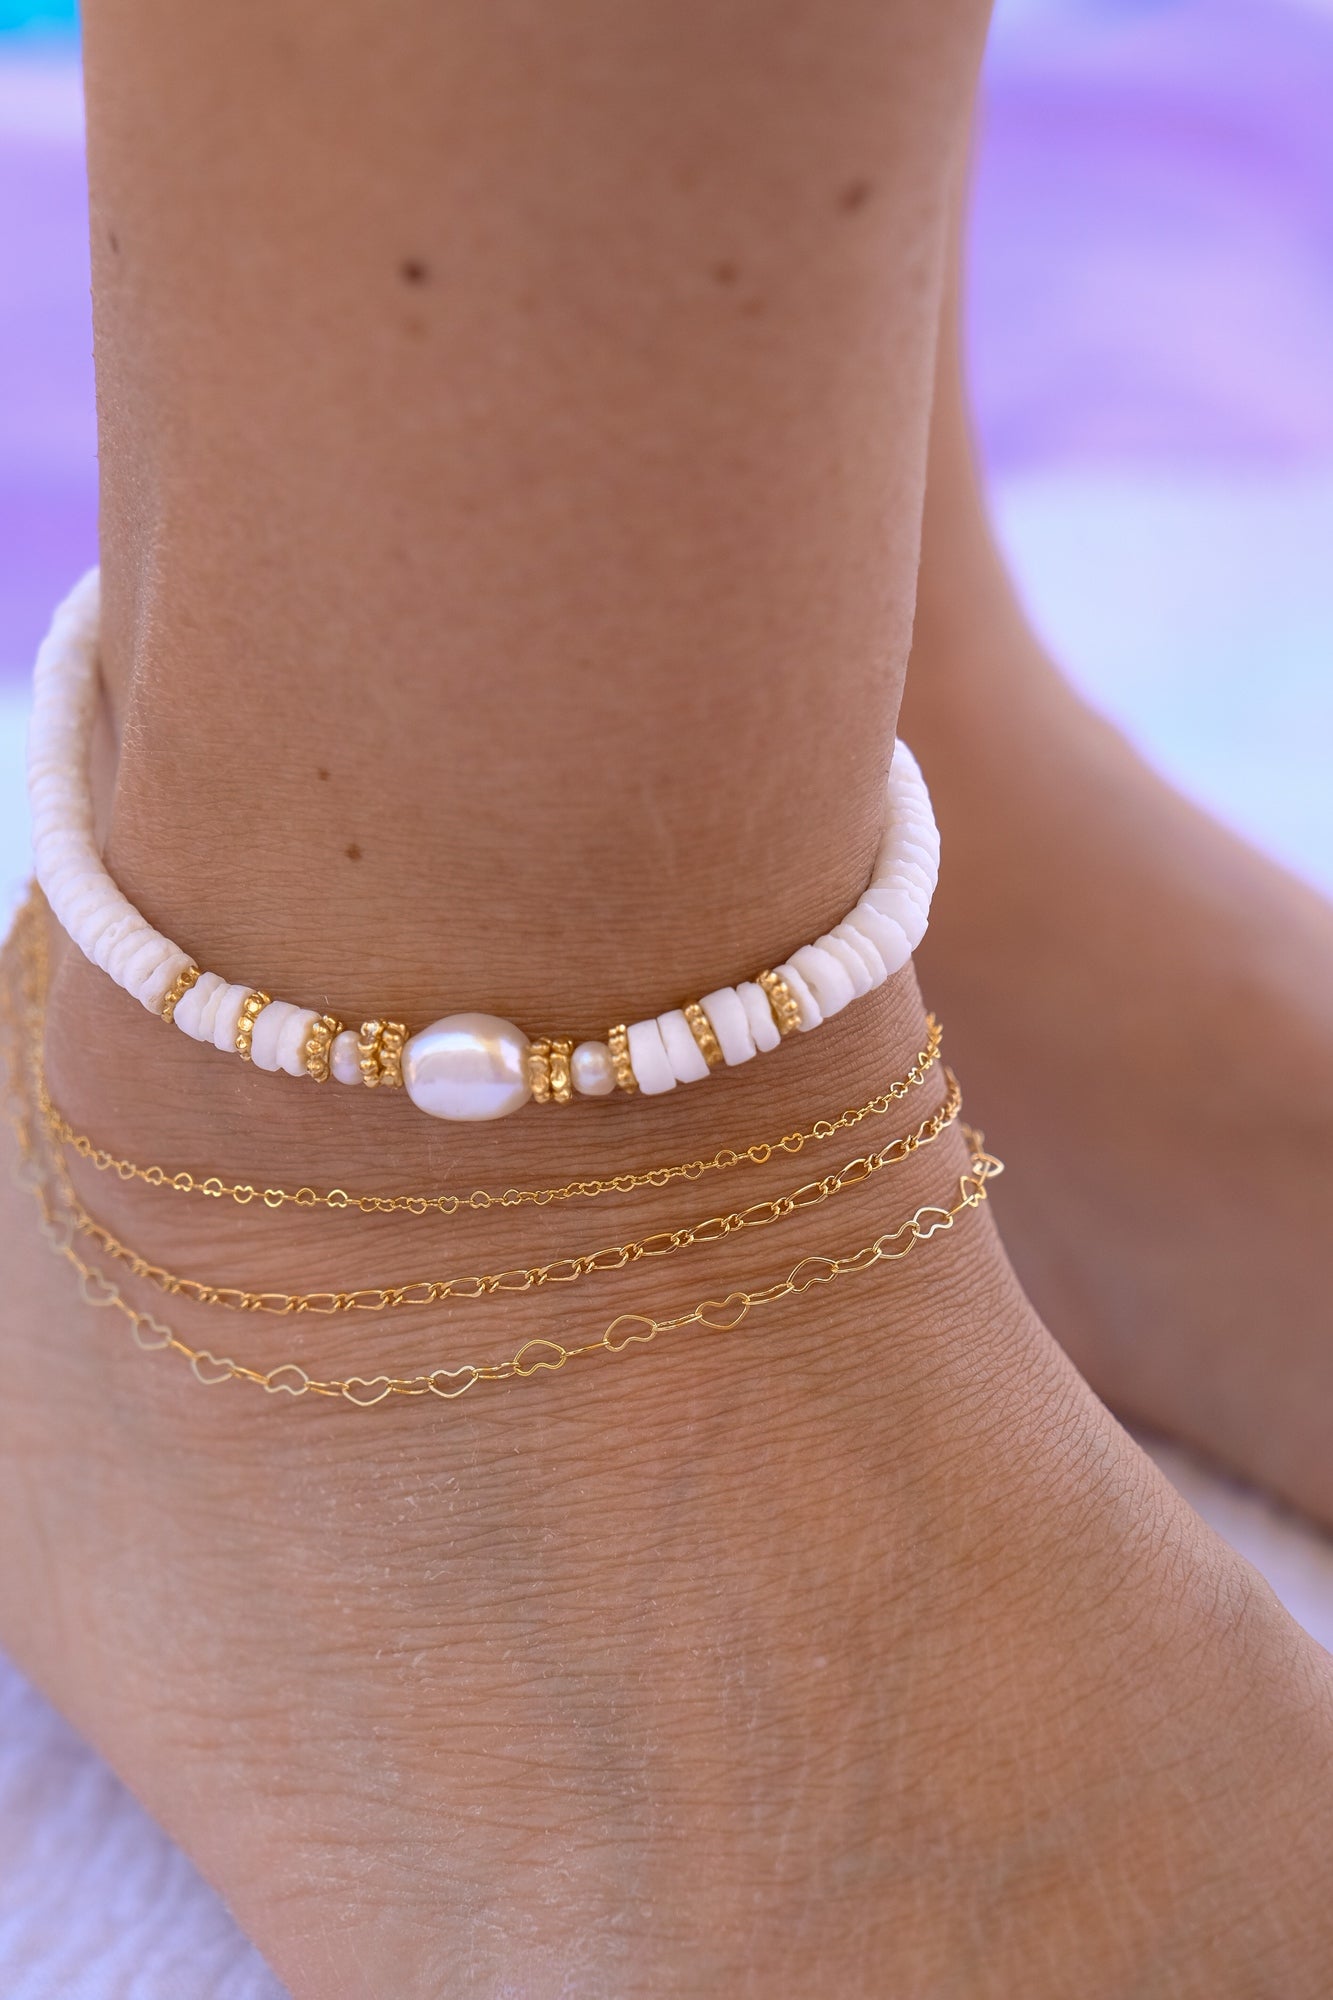 “Siren” ankle chain (your choice)